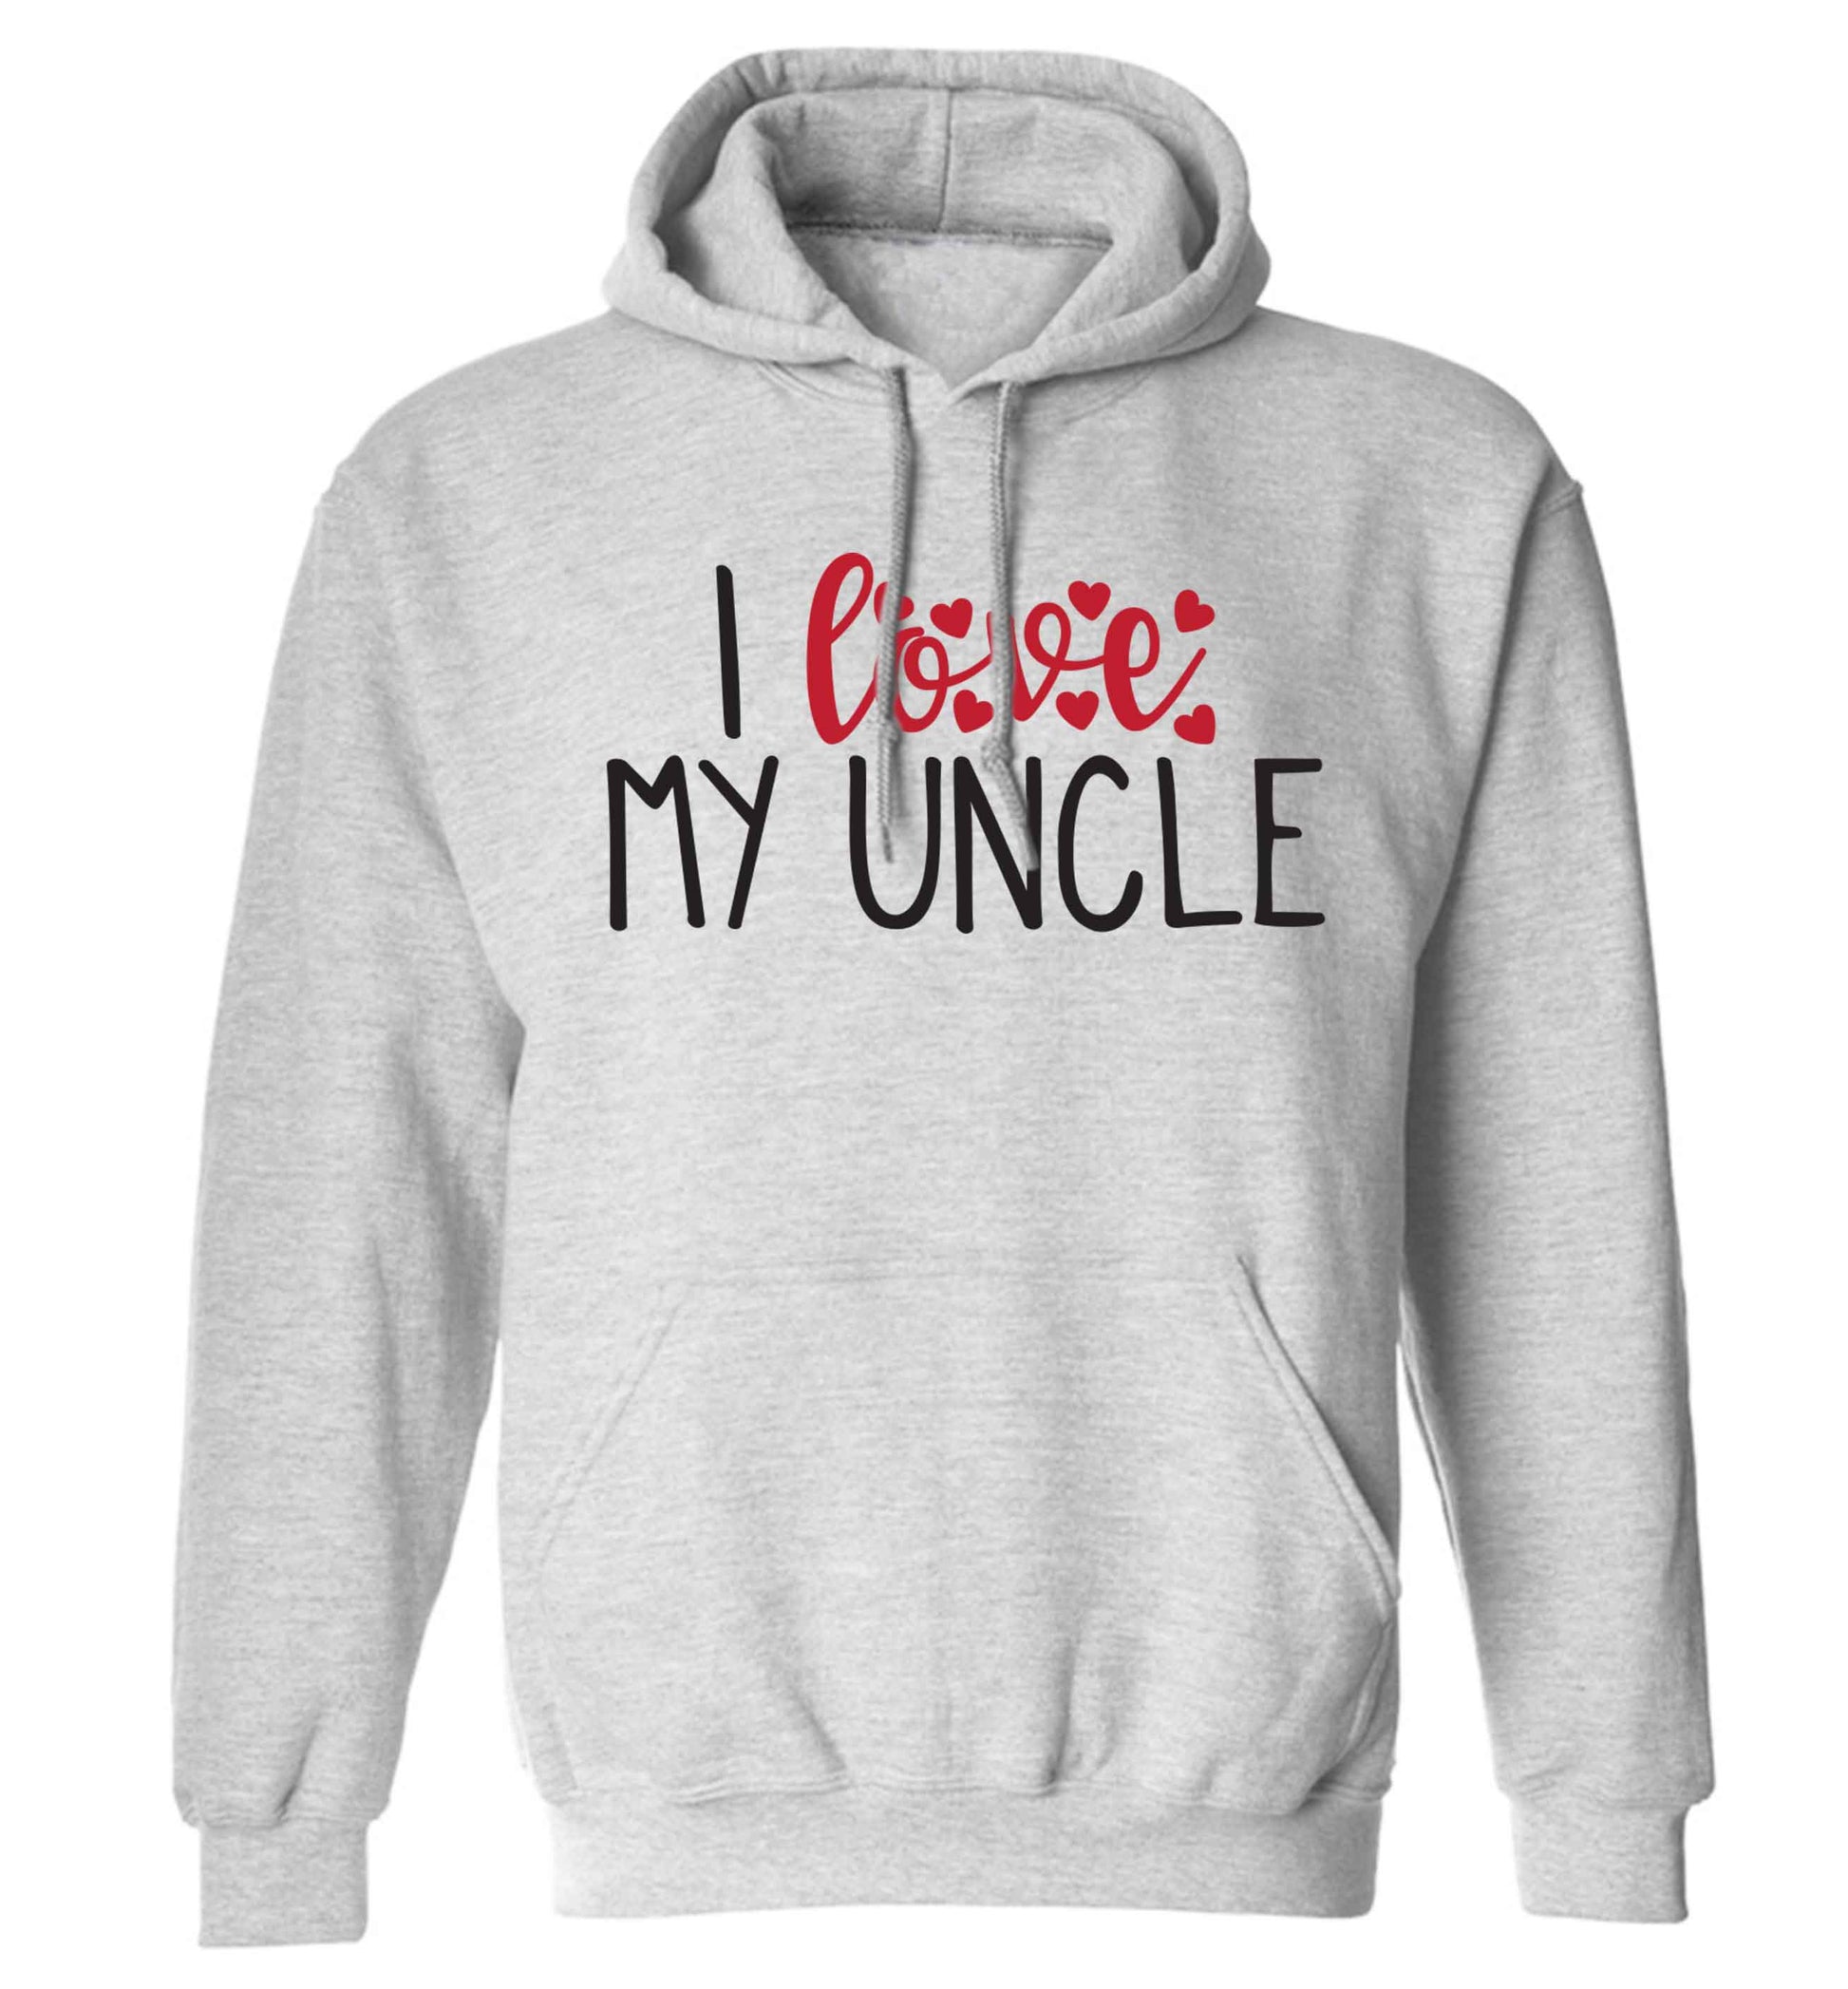 I love my uncle adults unisex grey hoodie 2XL